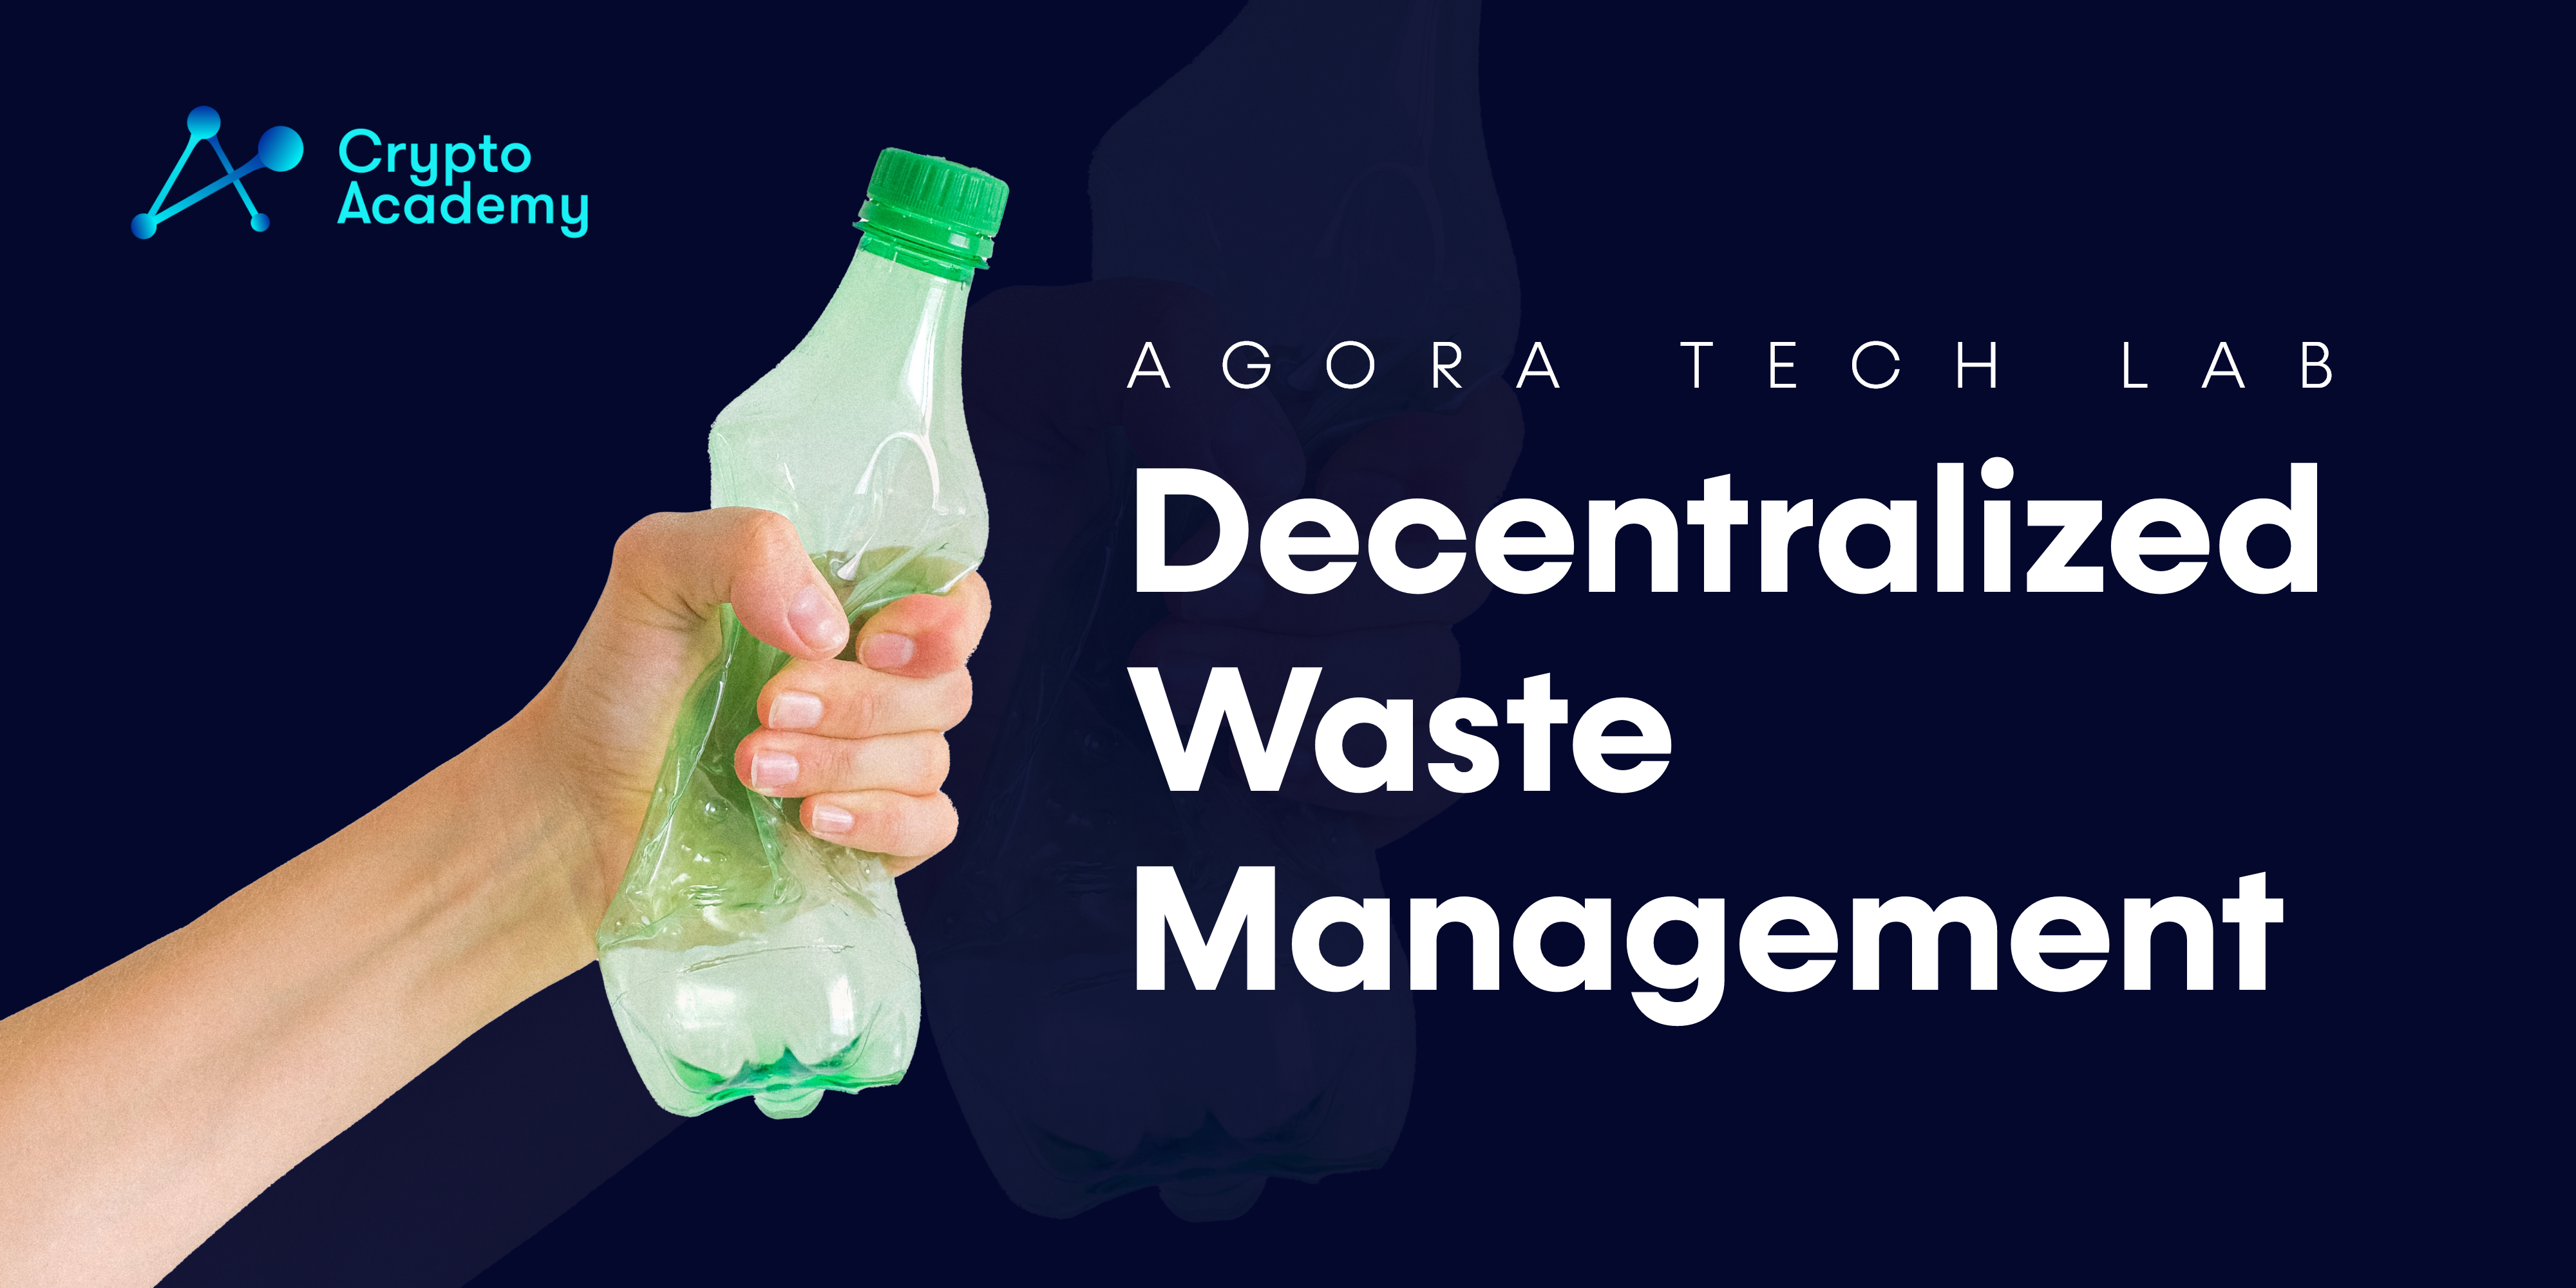 Meet Agora Tech Lab (ATL) - The First Global Initiative to Decentralized Waste Management